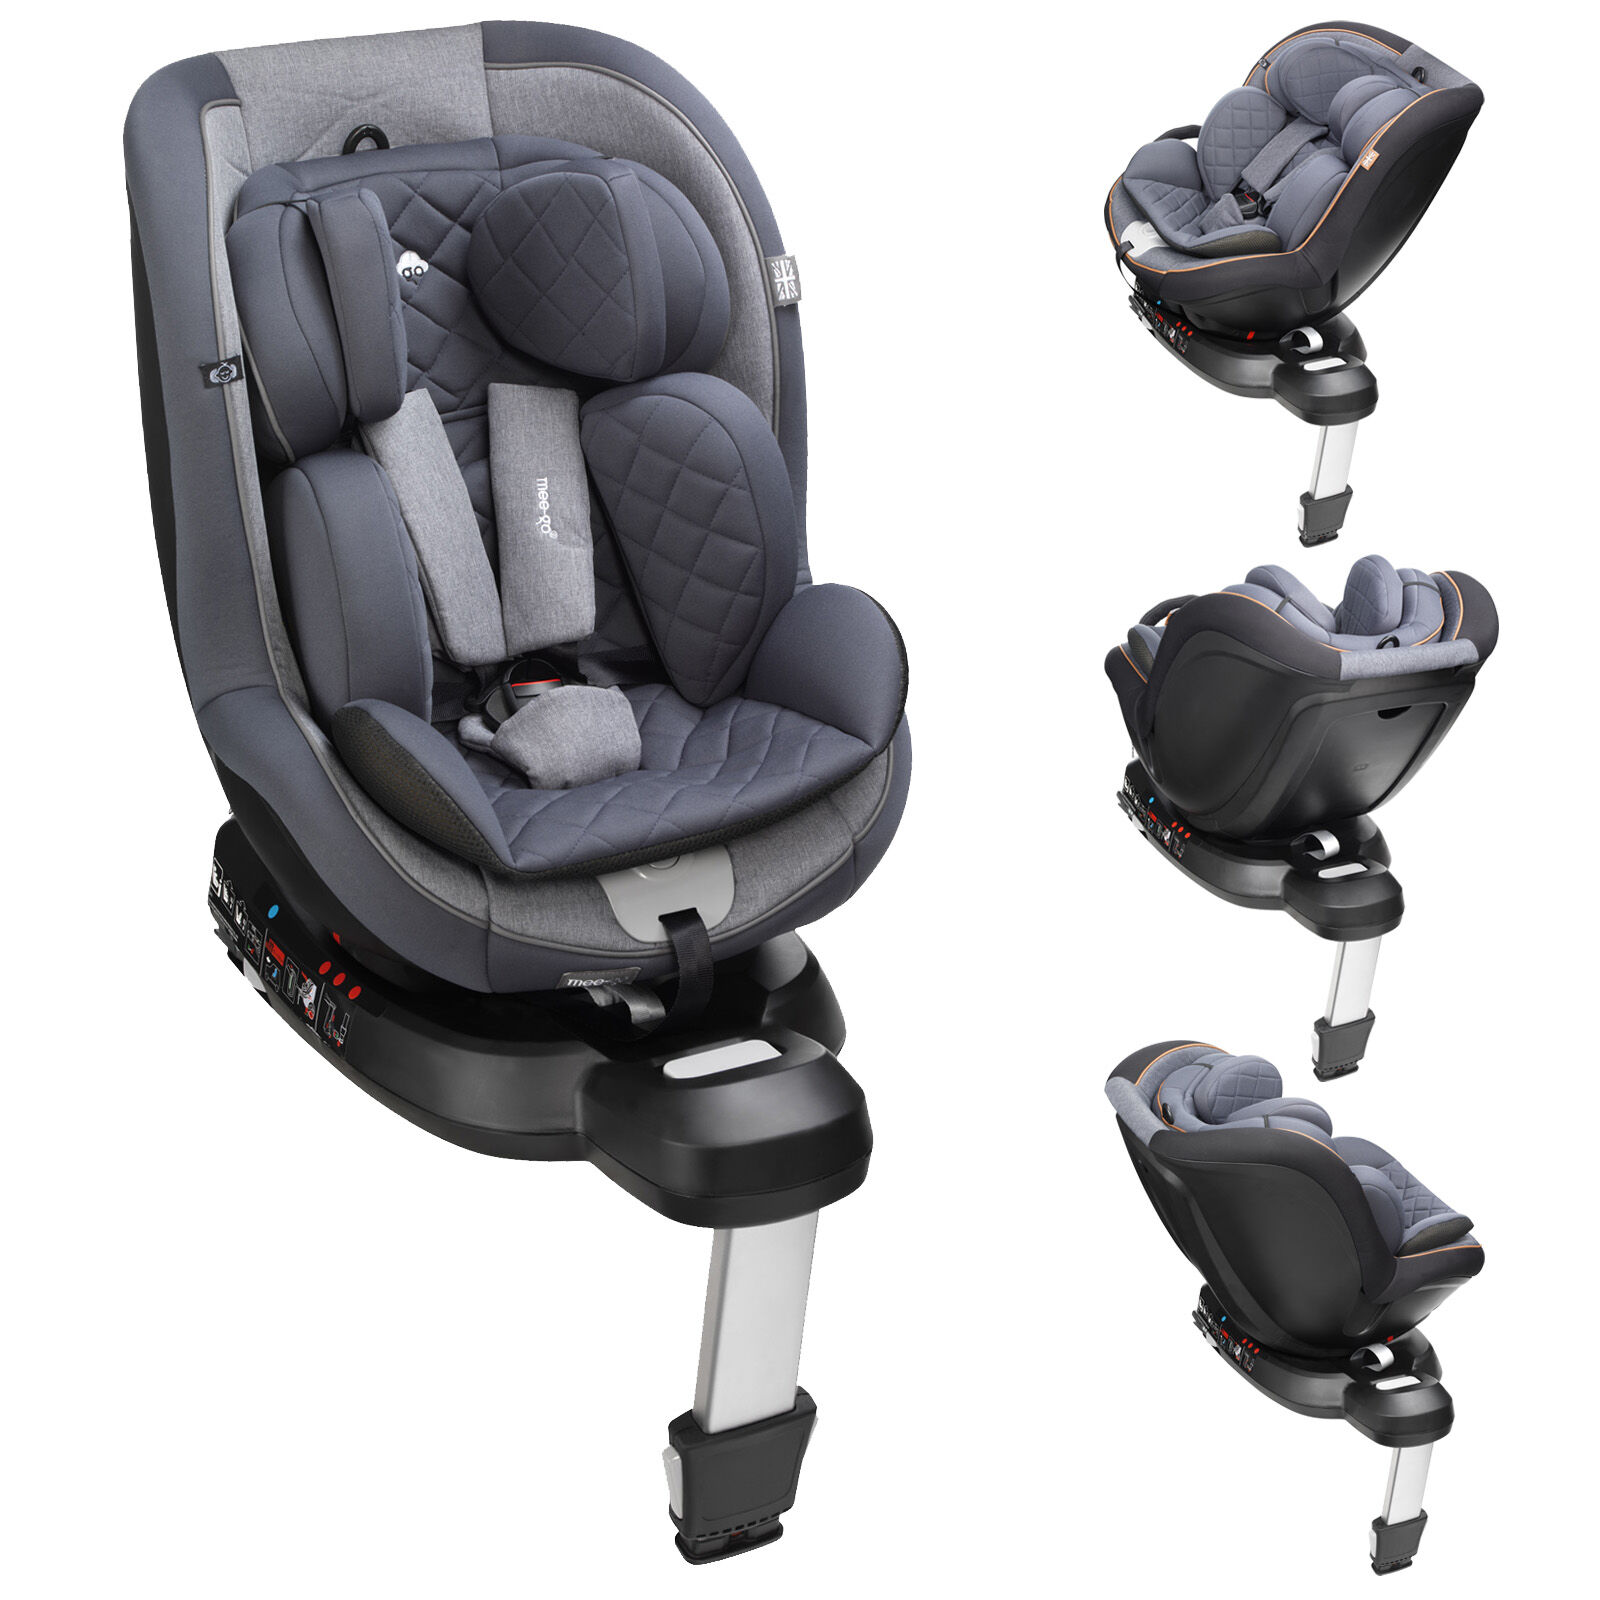 Mee-Go Swirl i-Size Group 0+/1 360 Spin Car Seat - Pebble Grey